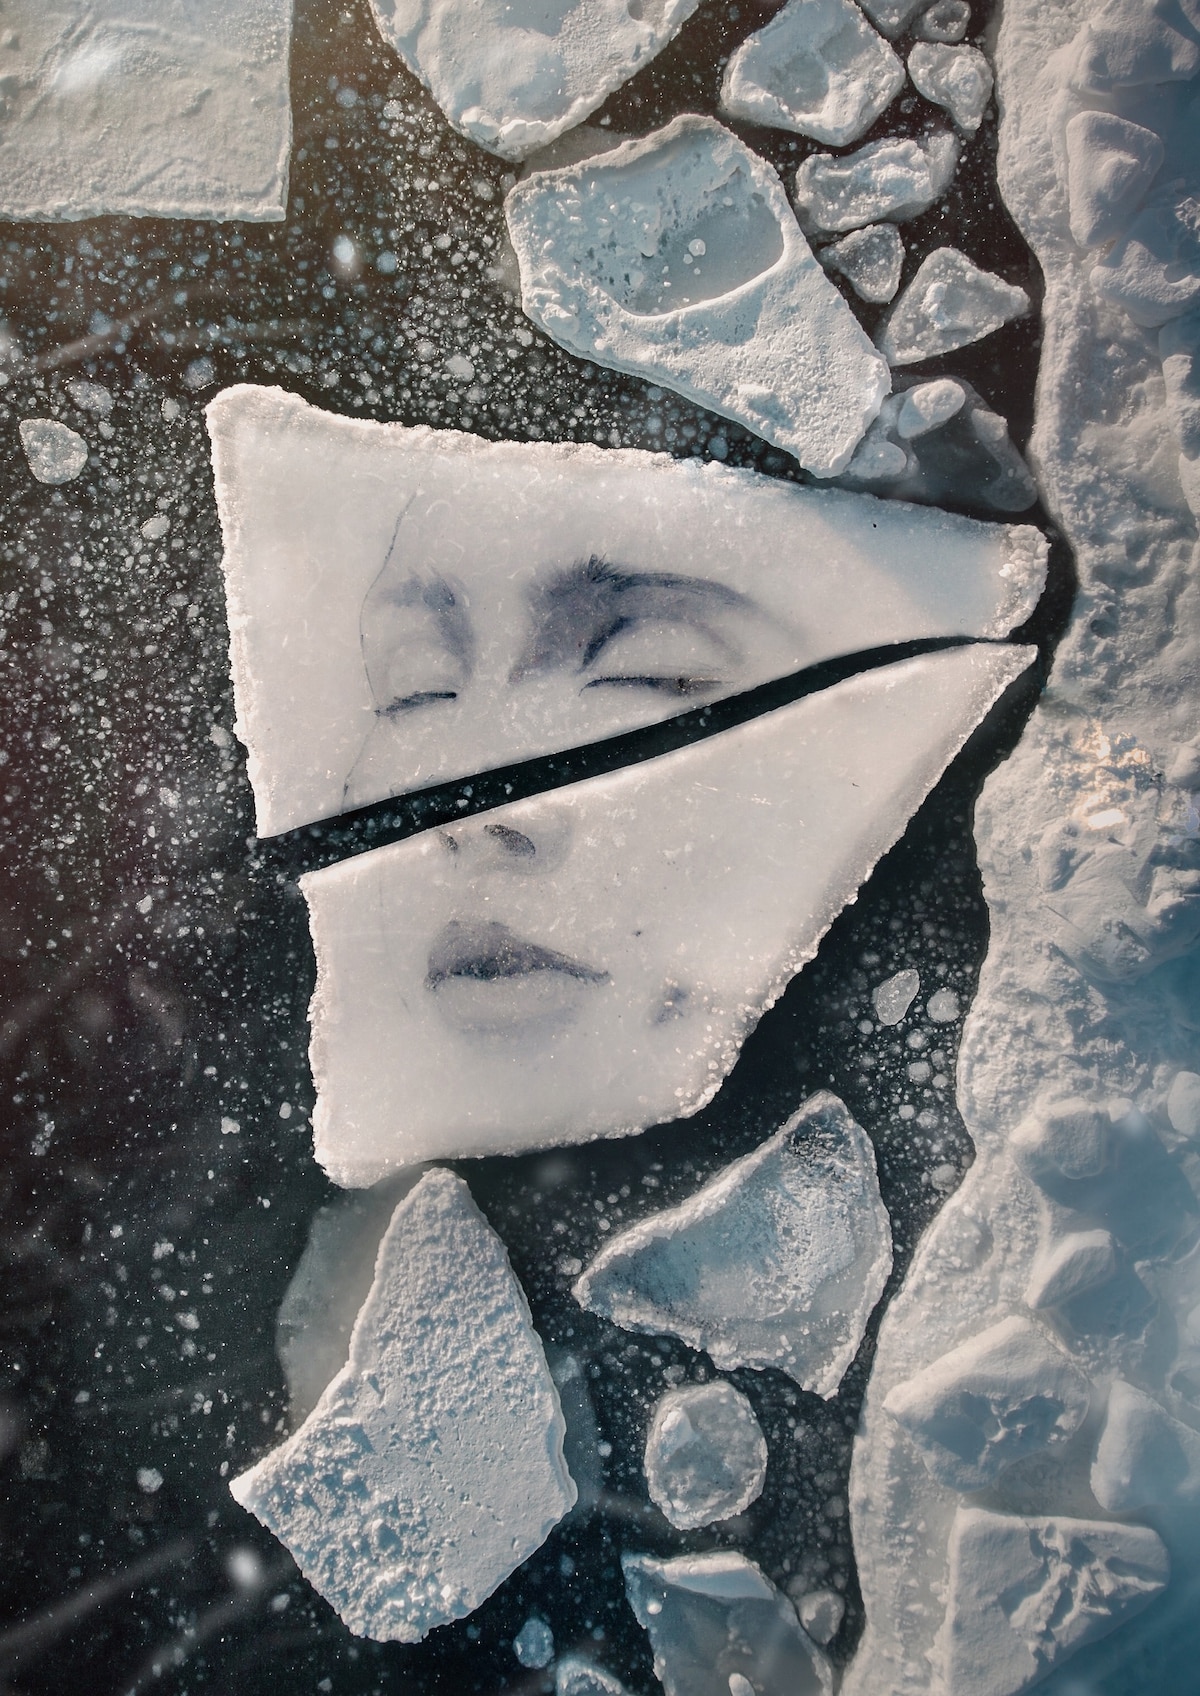 David Popa Mural of a Woman on Floating Ice